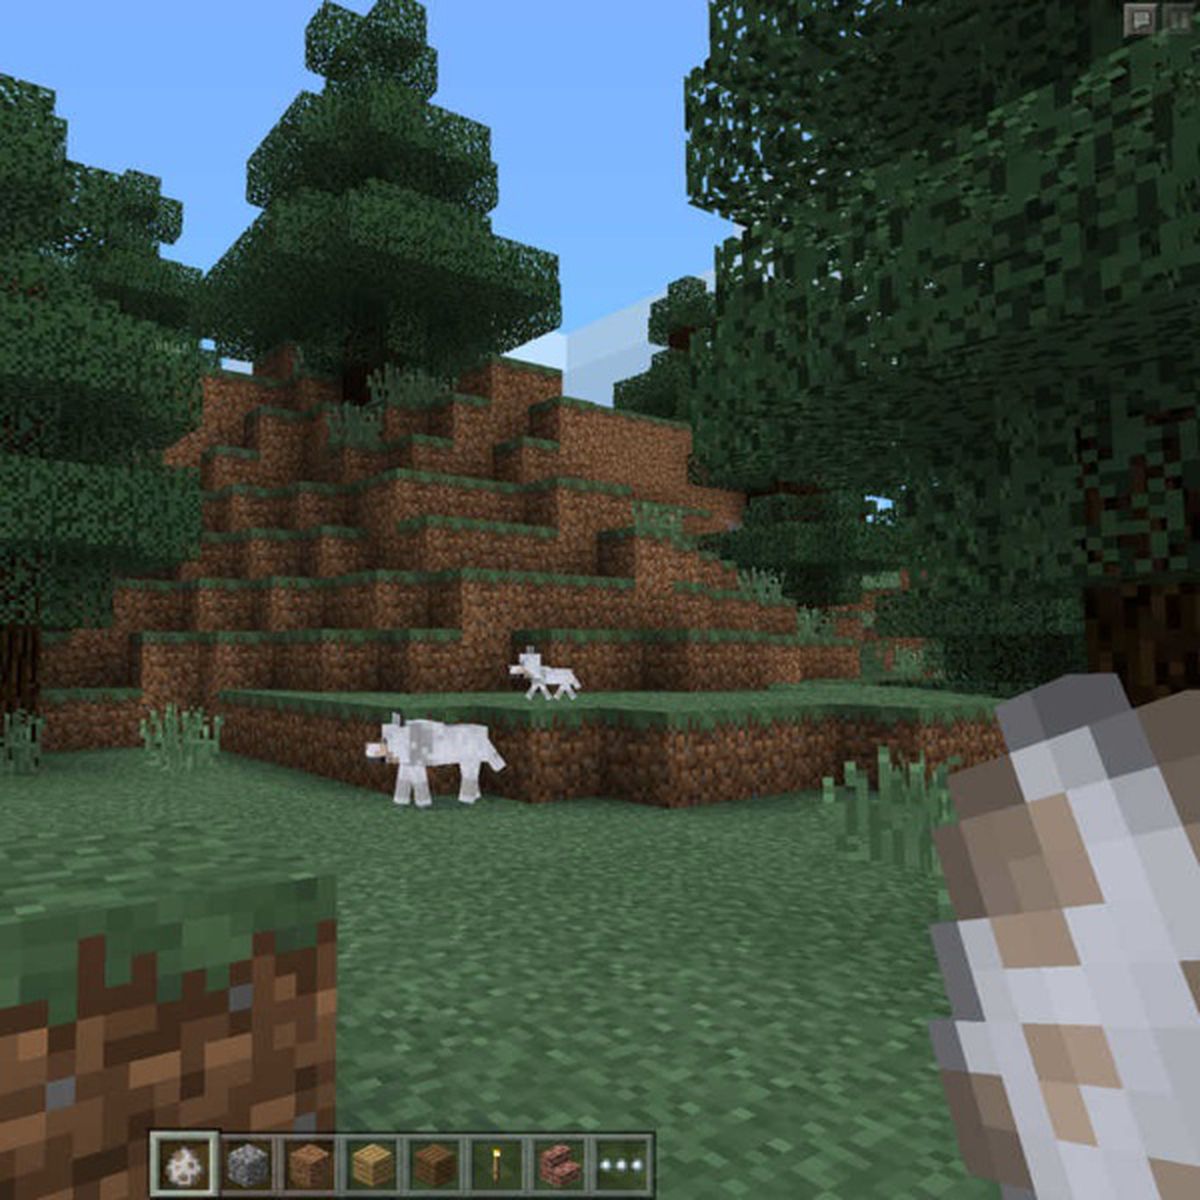 Minecraft Pocket Edition will get 'significantly bigger worlds